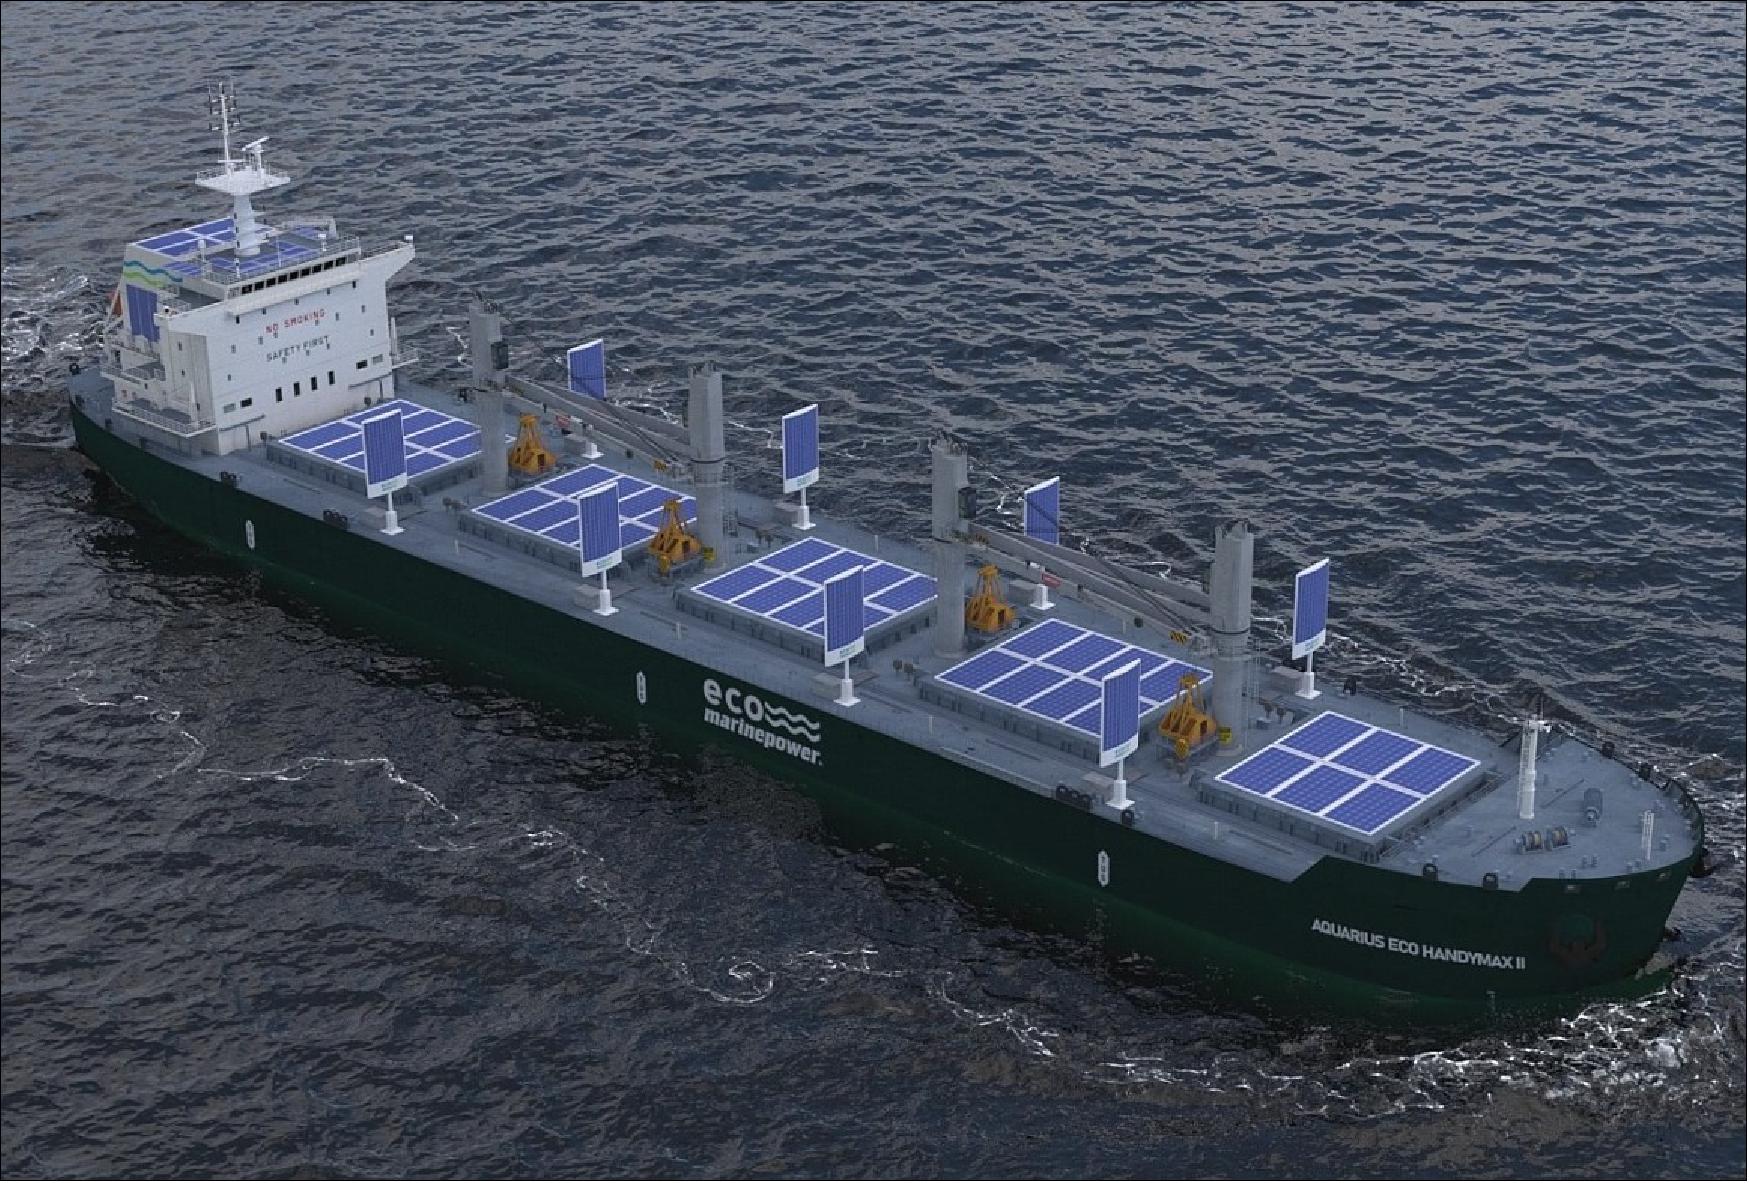 Figure 47: Eco Marine Power has released details of a new Handymax bulker that incorporates a range of renewable energy solutions, energy-saving devices, electric propulsion and fuel cells (image credit: Eco Marine Power)